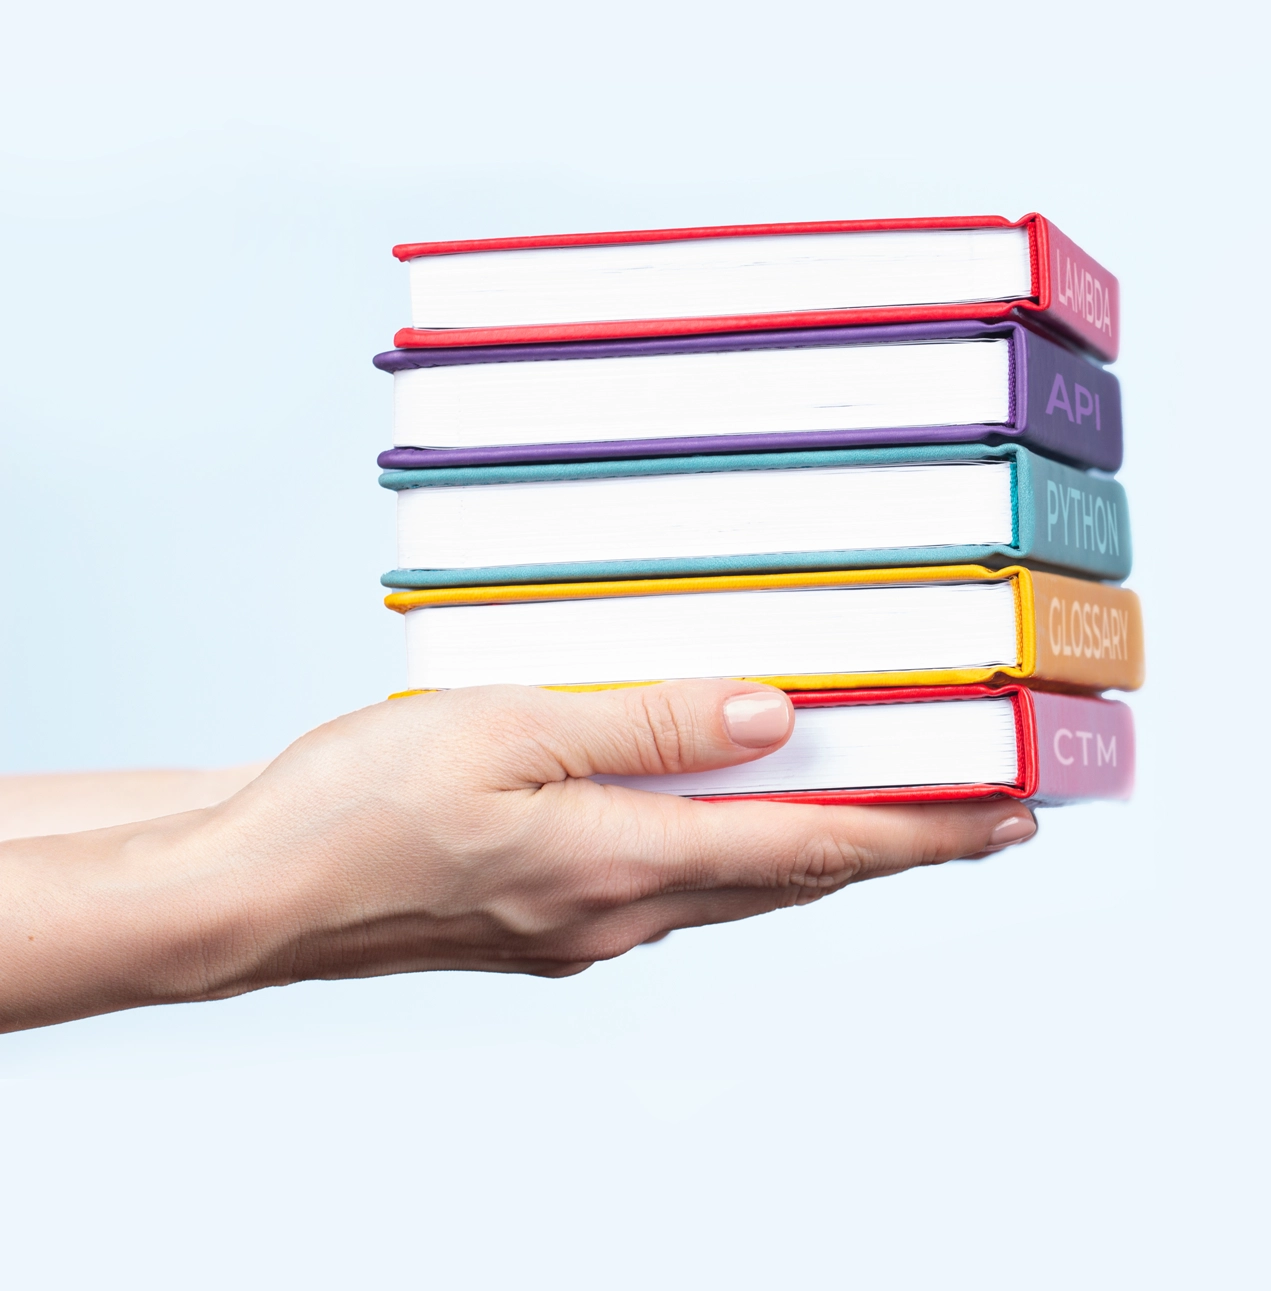 a person's hands holding a stack of text books on the topics of API, Lambda, glossary, and CallTrackingMetrics